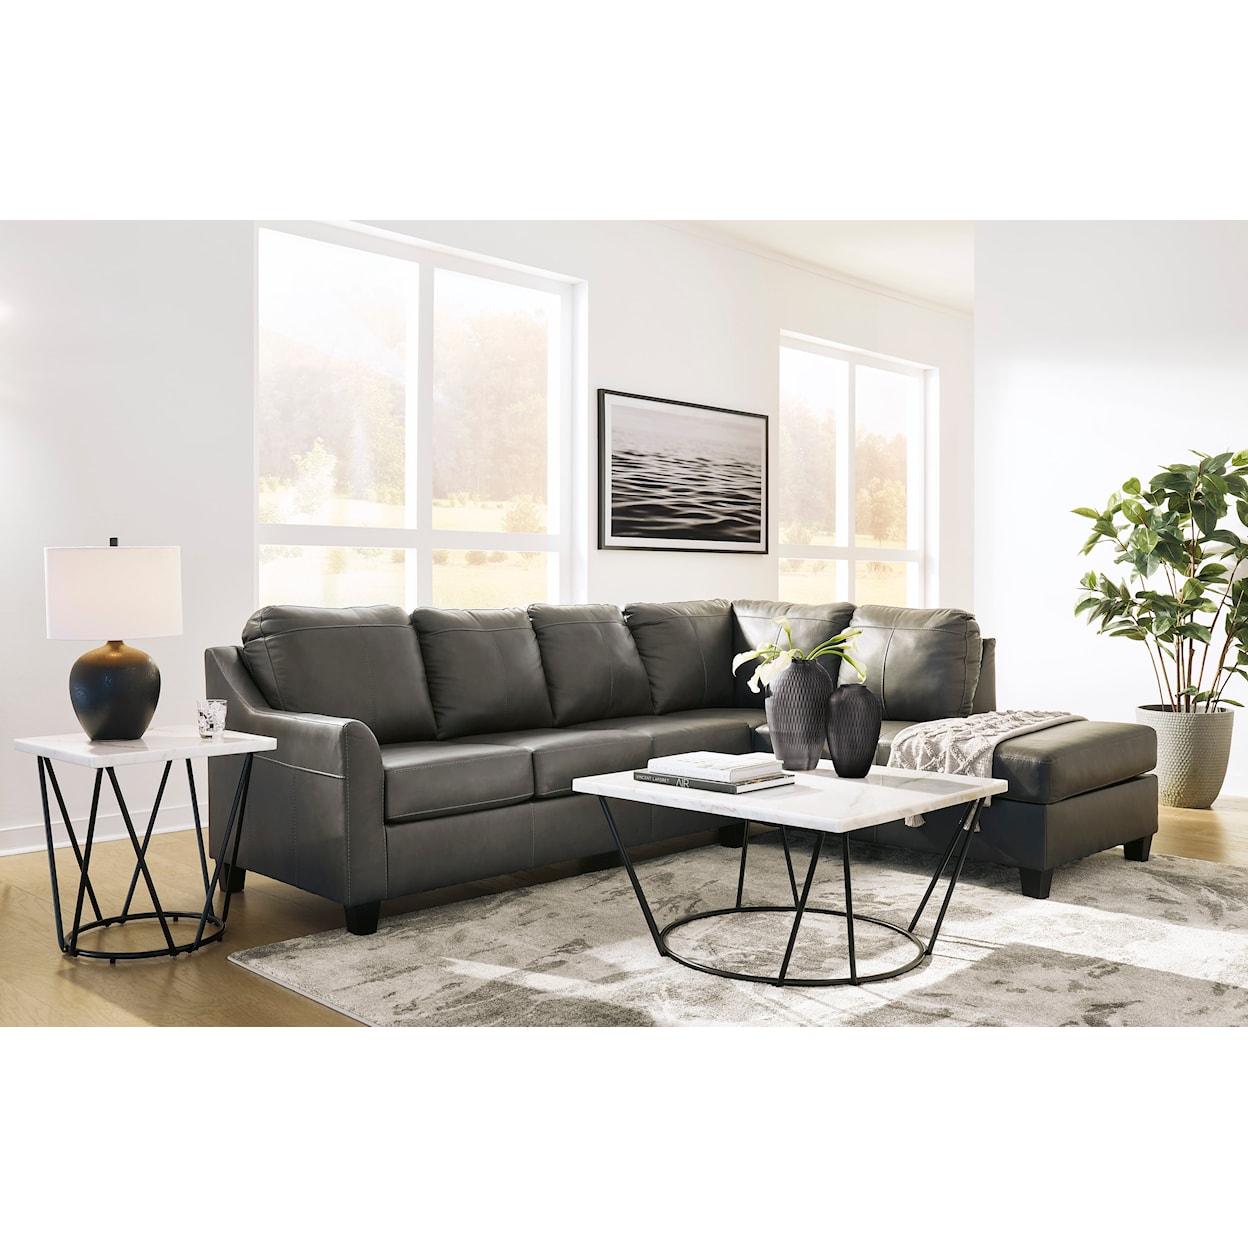 Belfort Select Valderno 2-Piece Sectional with Chaise